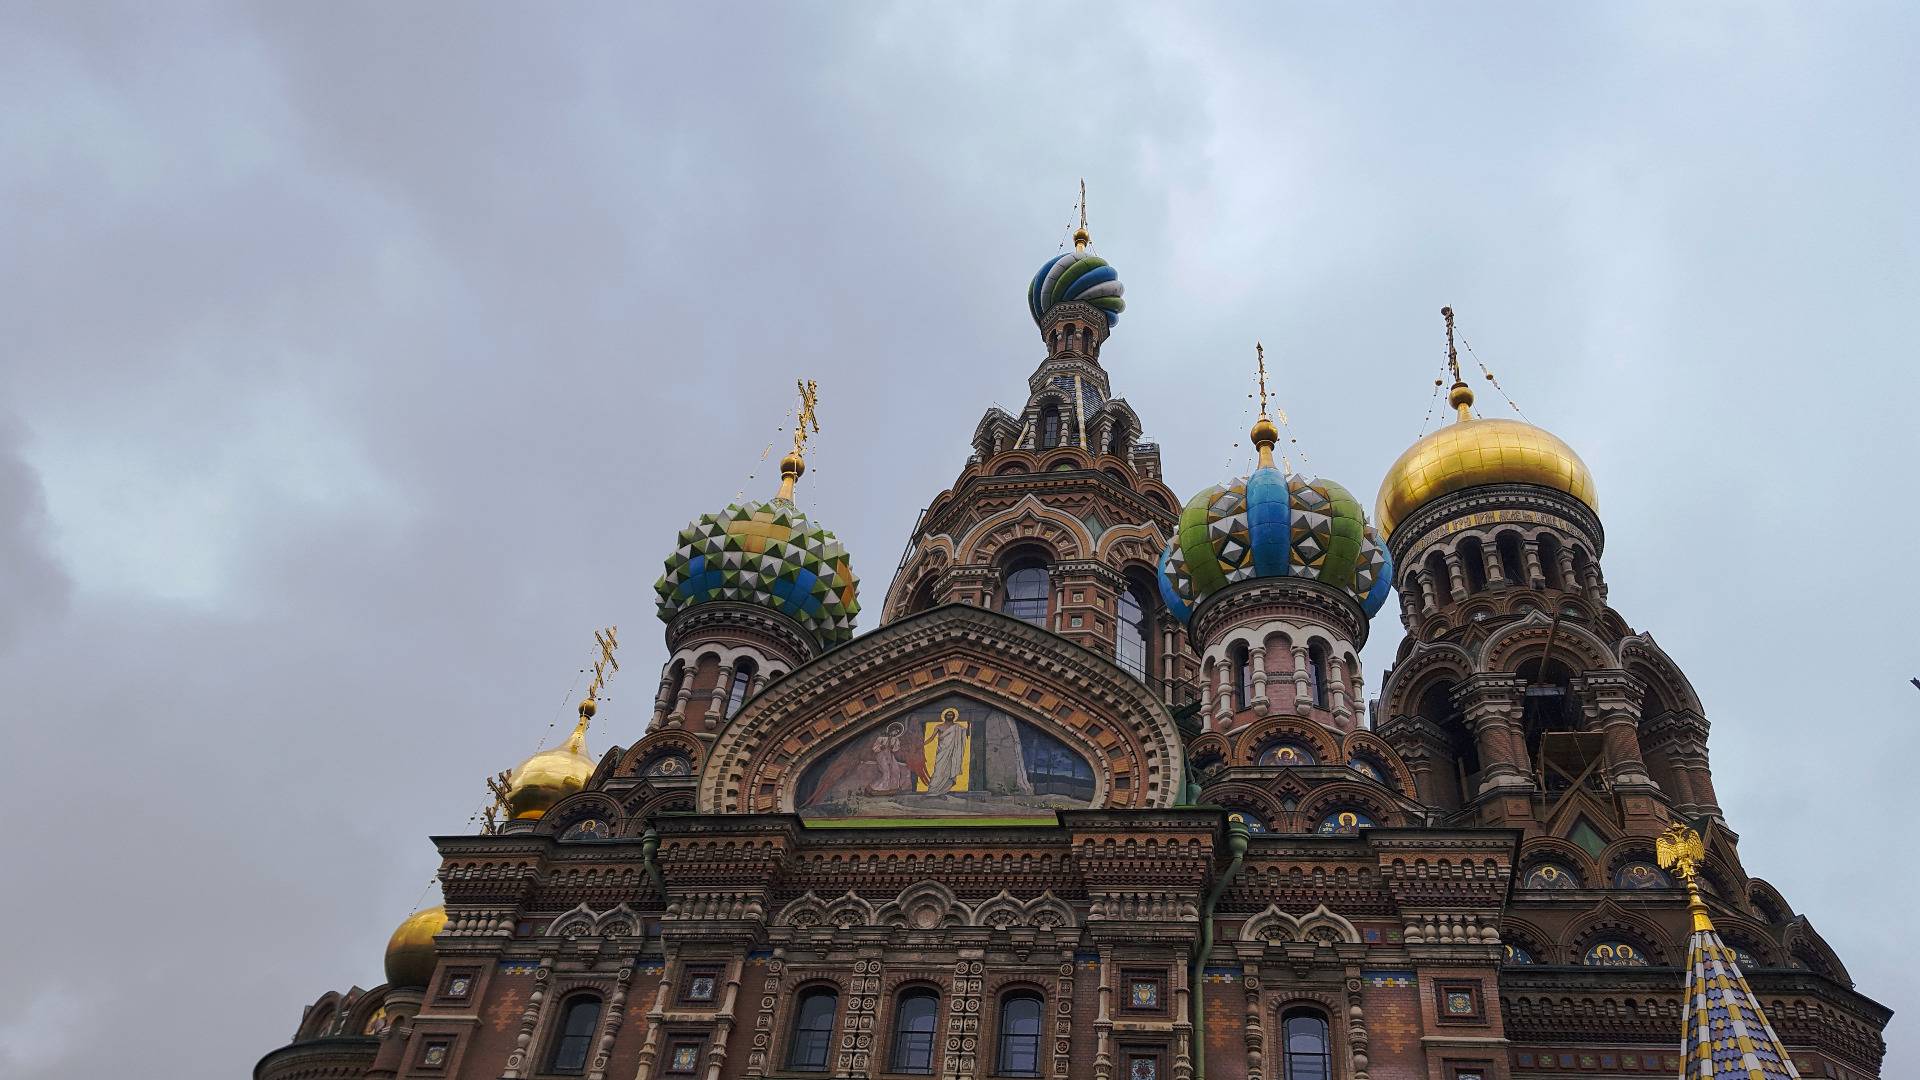 The Church of Savior on the Spilled Blood, St. Petersburg